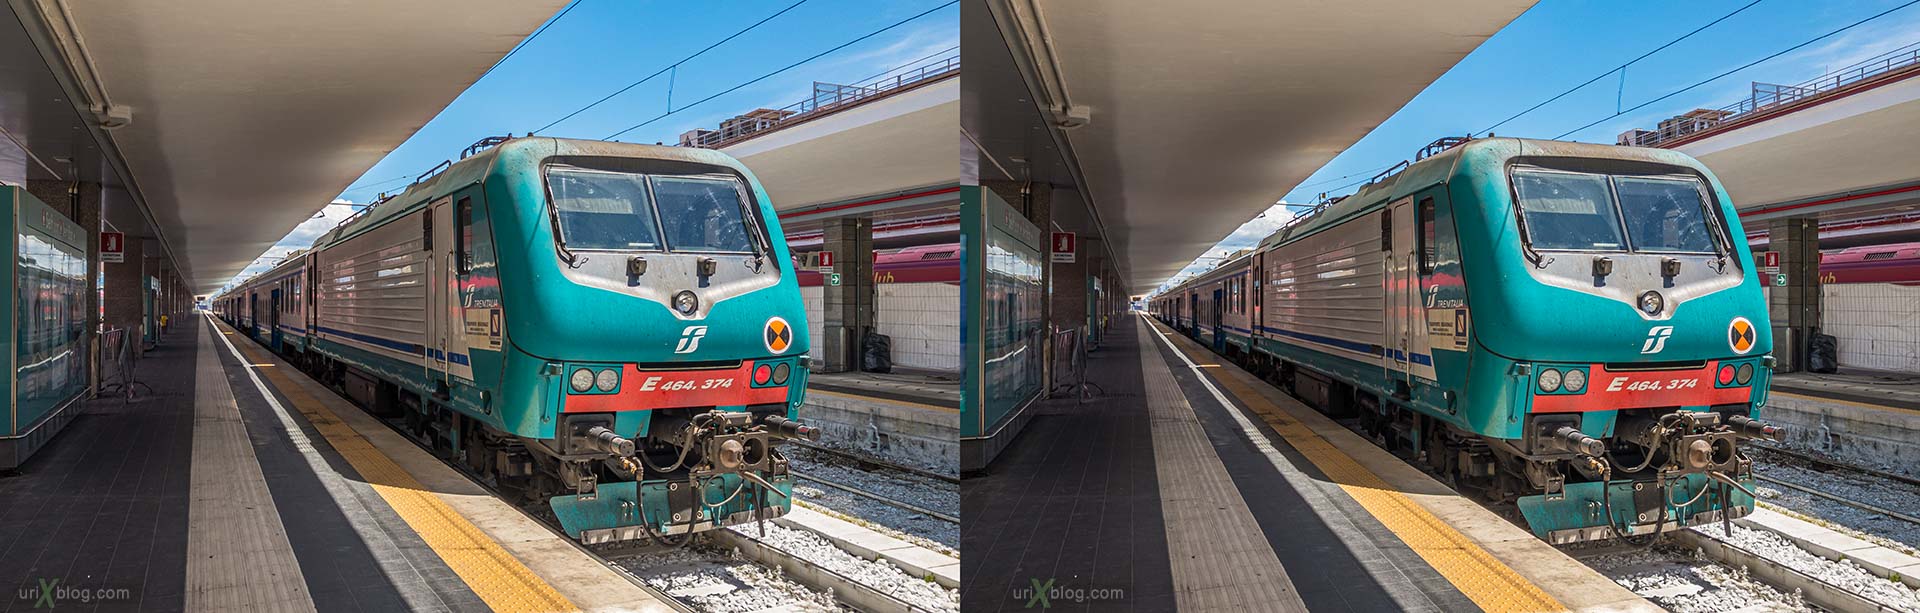 Napoli Centrale, Naples, train station, train, electric locomotive, Italy, 3D, stereo pair, cross-eyed, crossview, cross view stereo pair, stereoscopic